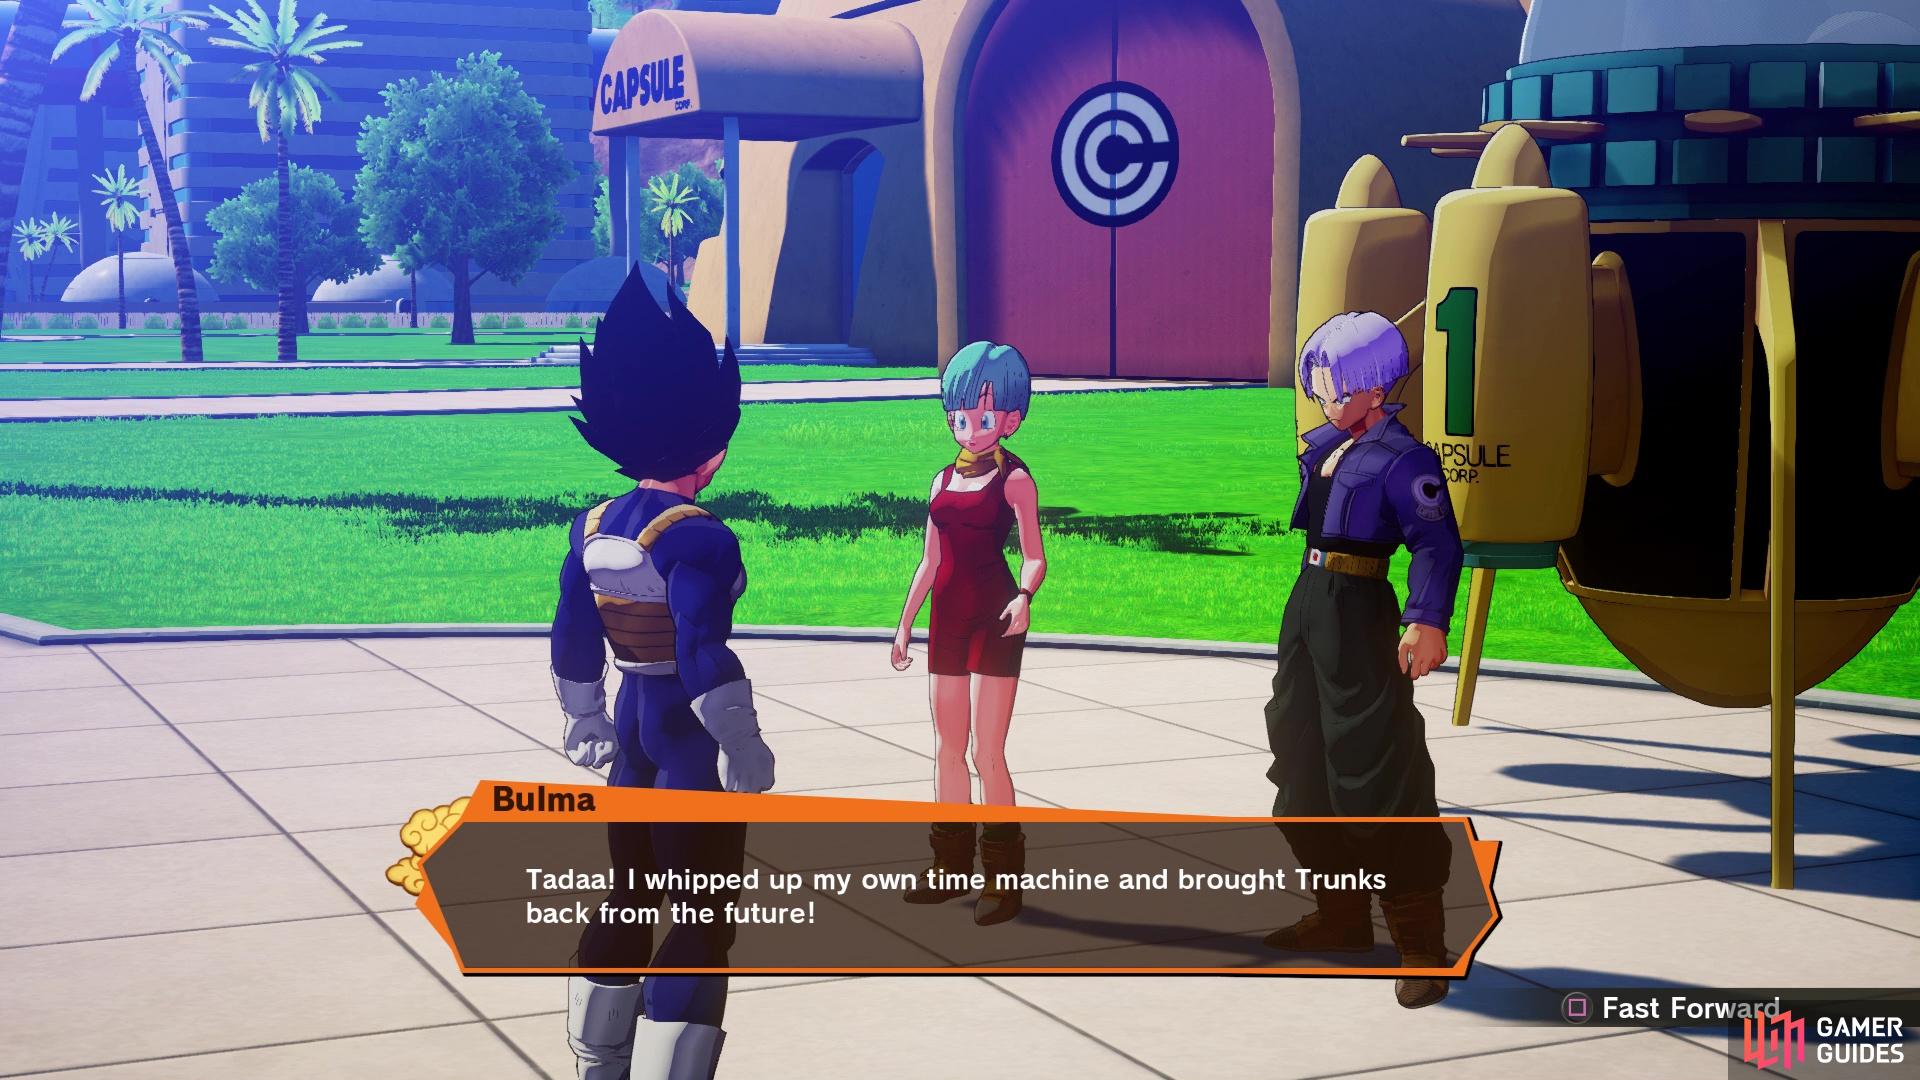 Speak with Bulma in front of Capsule Corp to unlock Future Trunks as a playable character